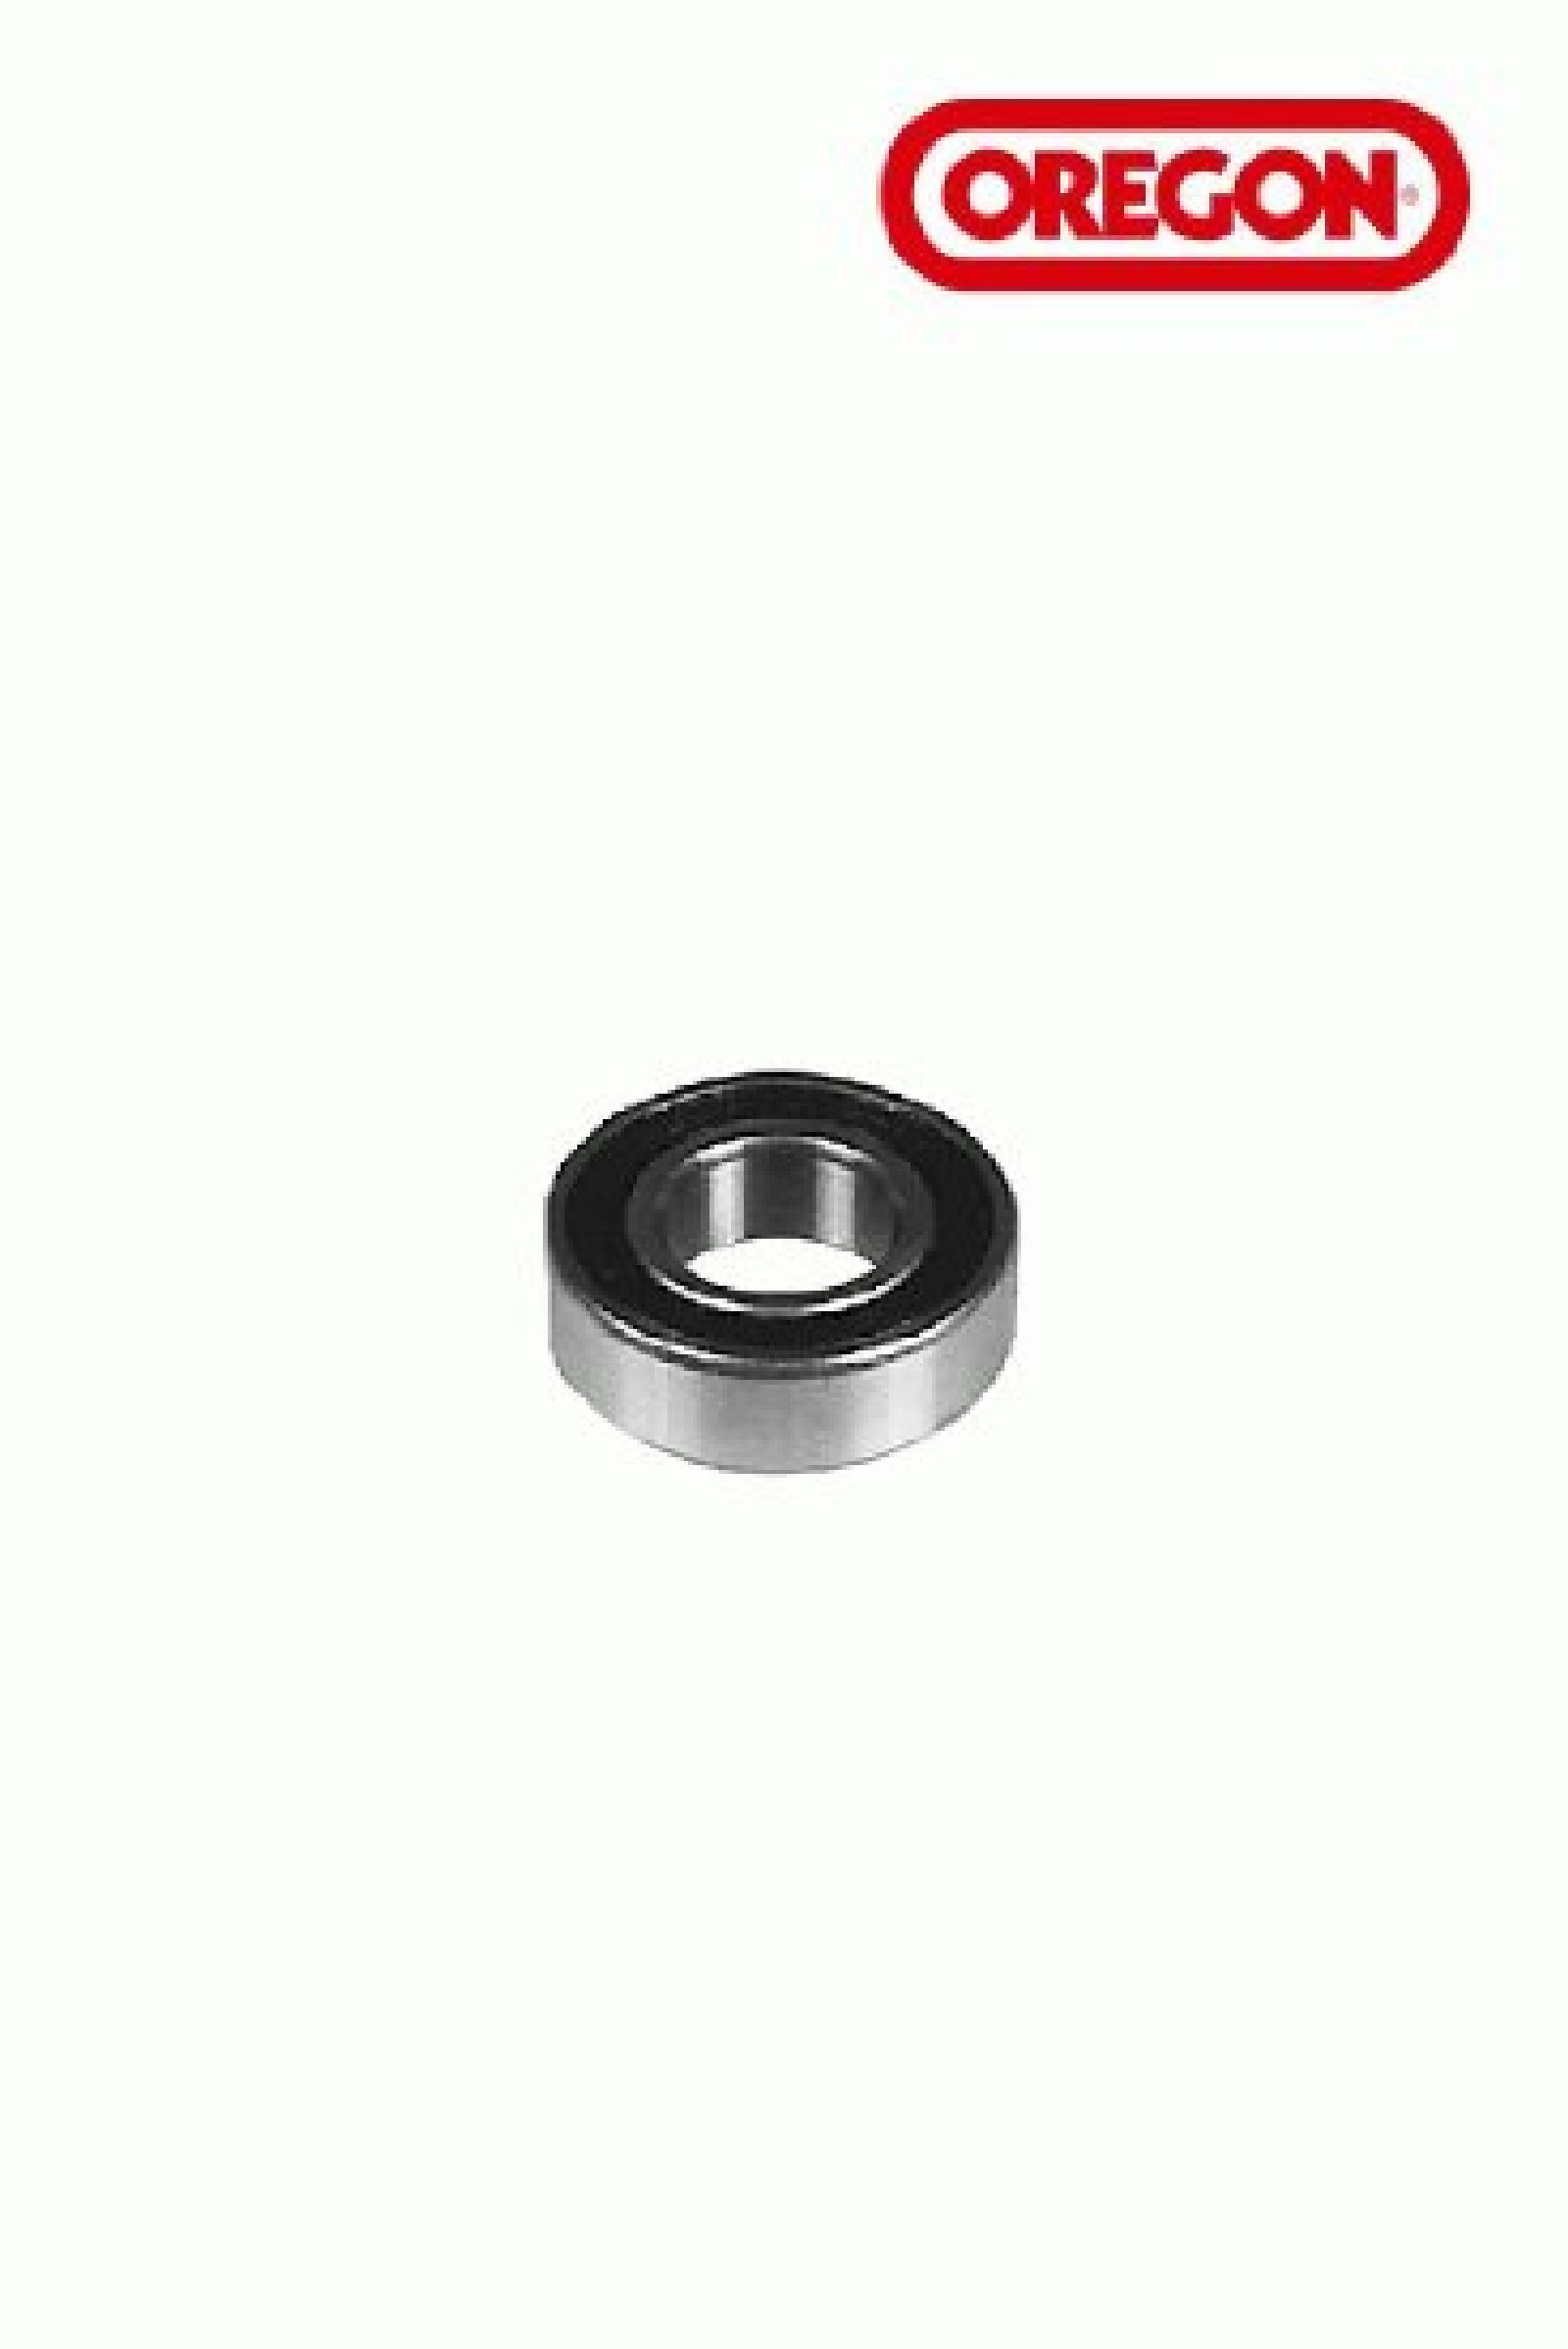 BEARING, BALL 1.125 X 0.5 part# 45-025 by Oregon - Click Image to Close